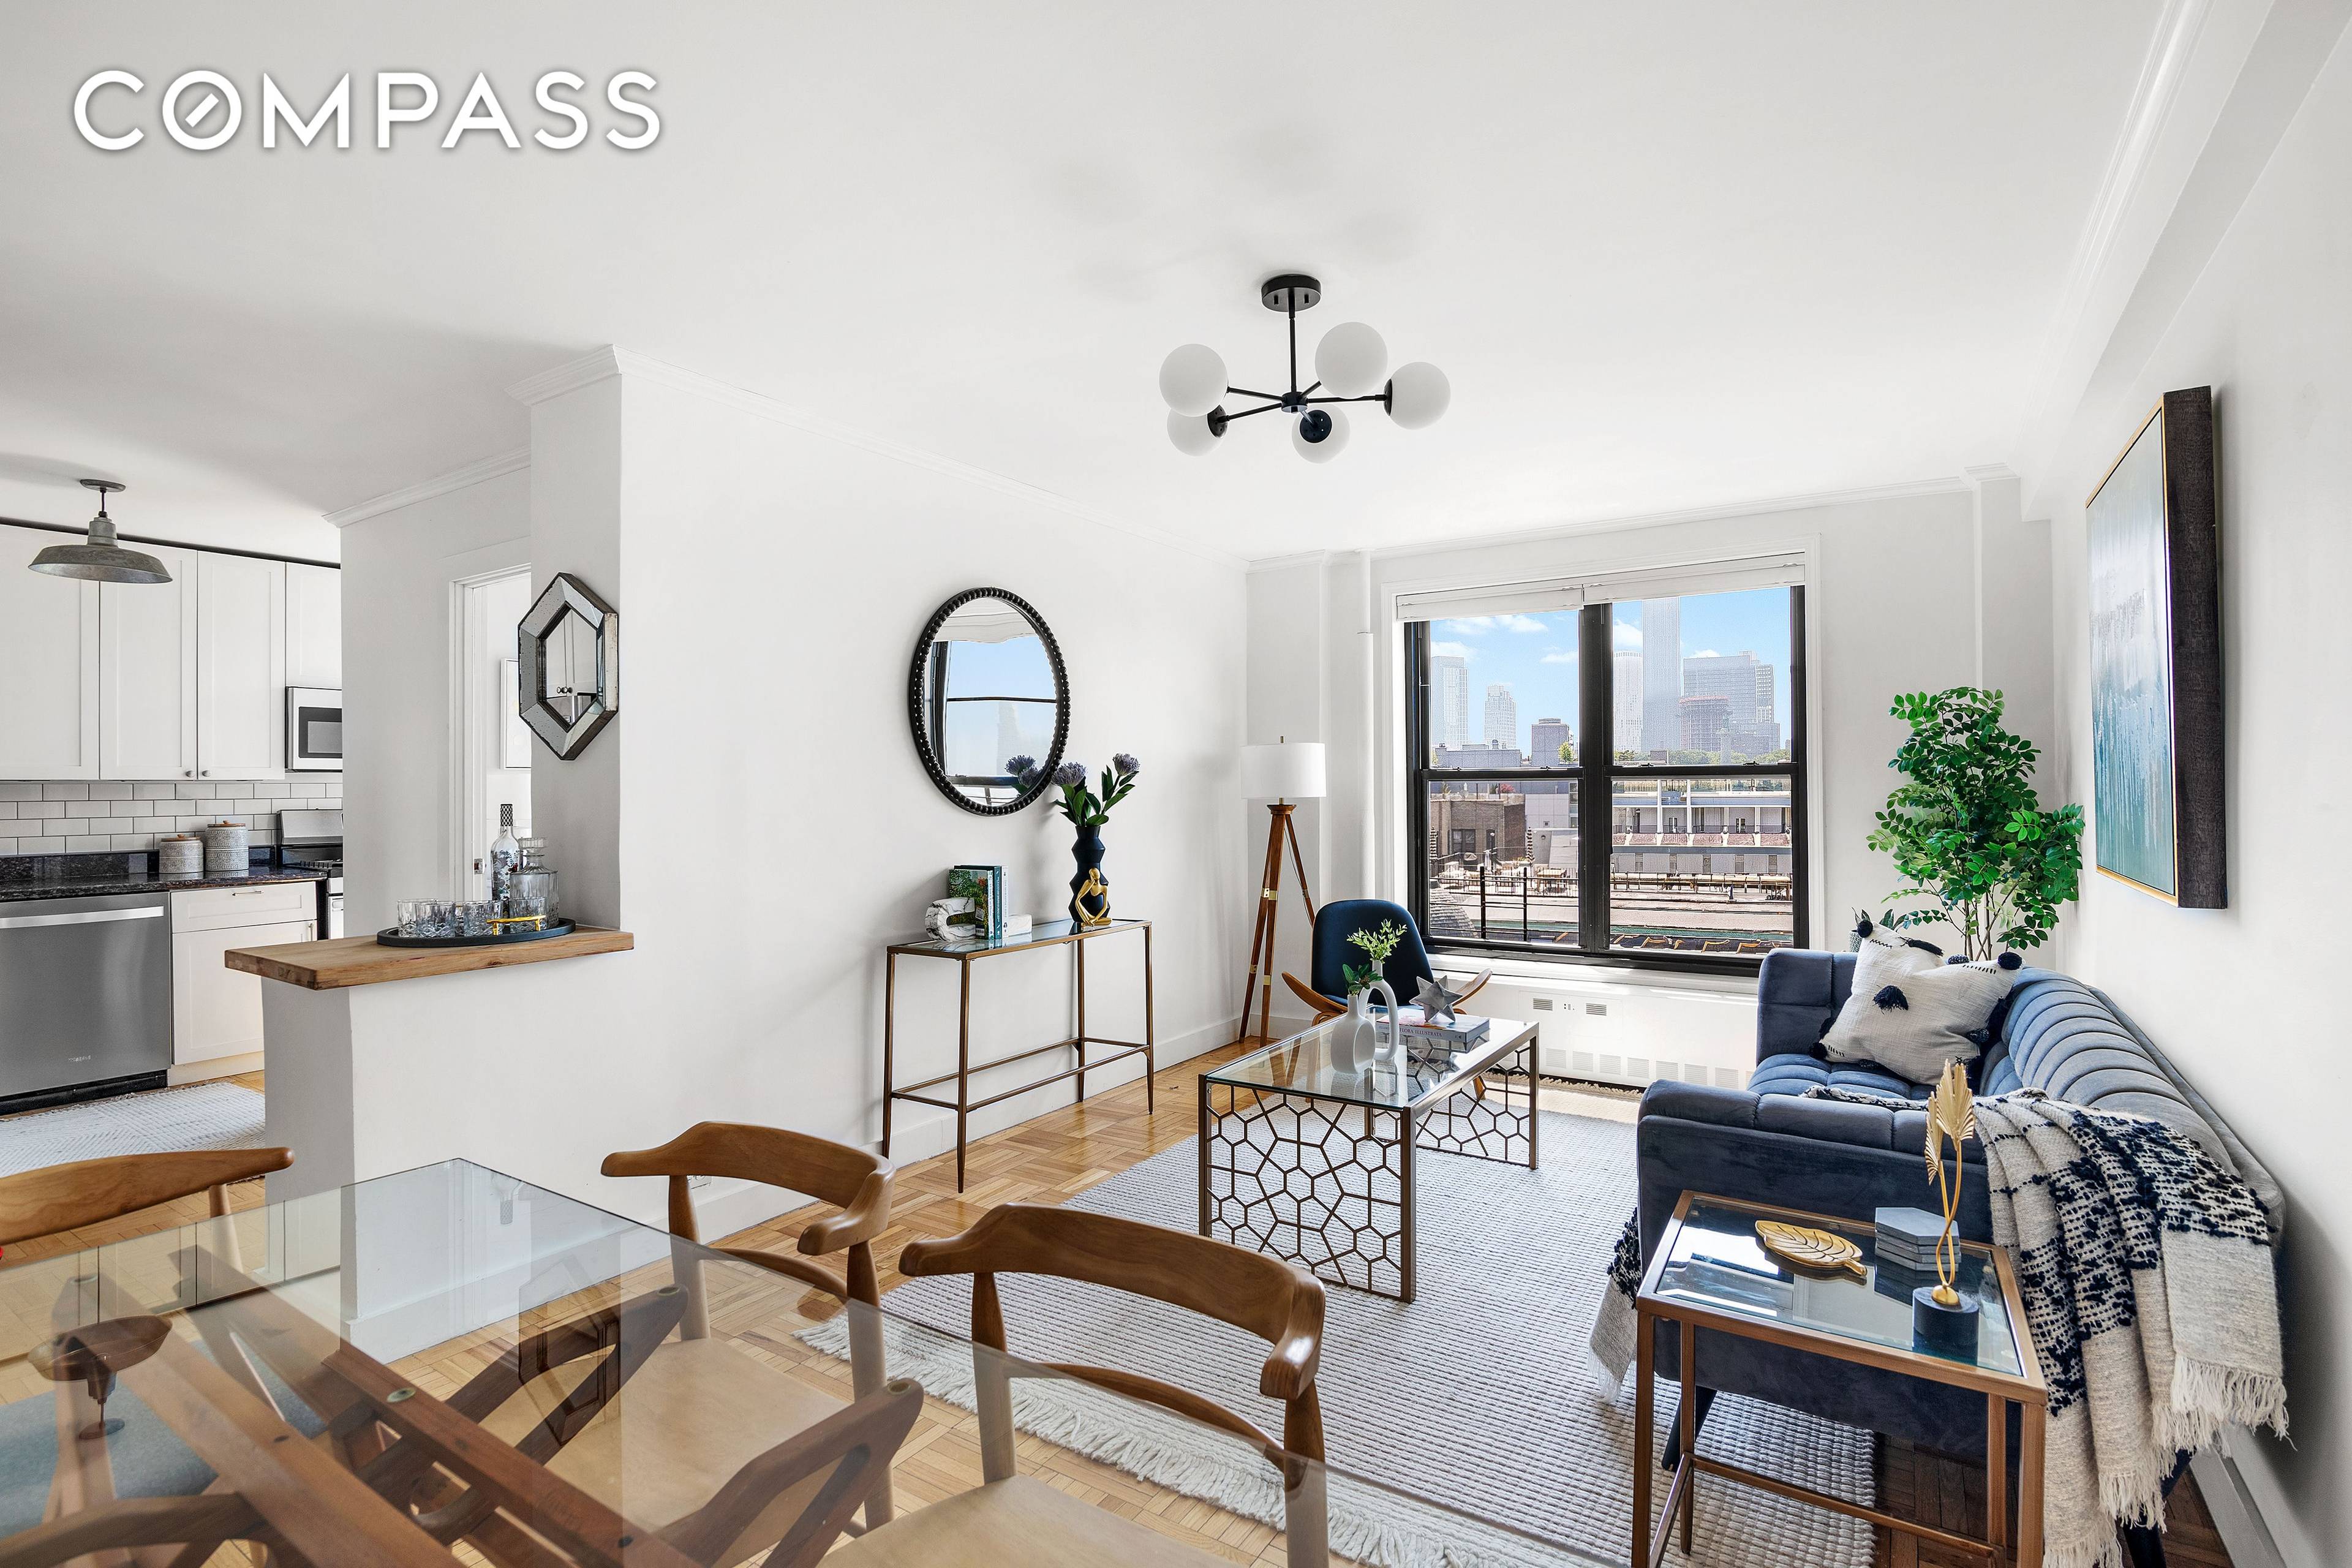 Beautifully renovated 1. 5 bedroom home in the heart of Clinton Hill, Brooklyn.